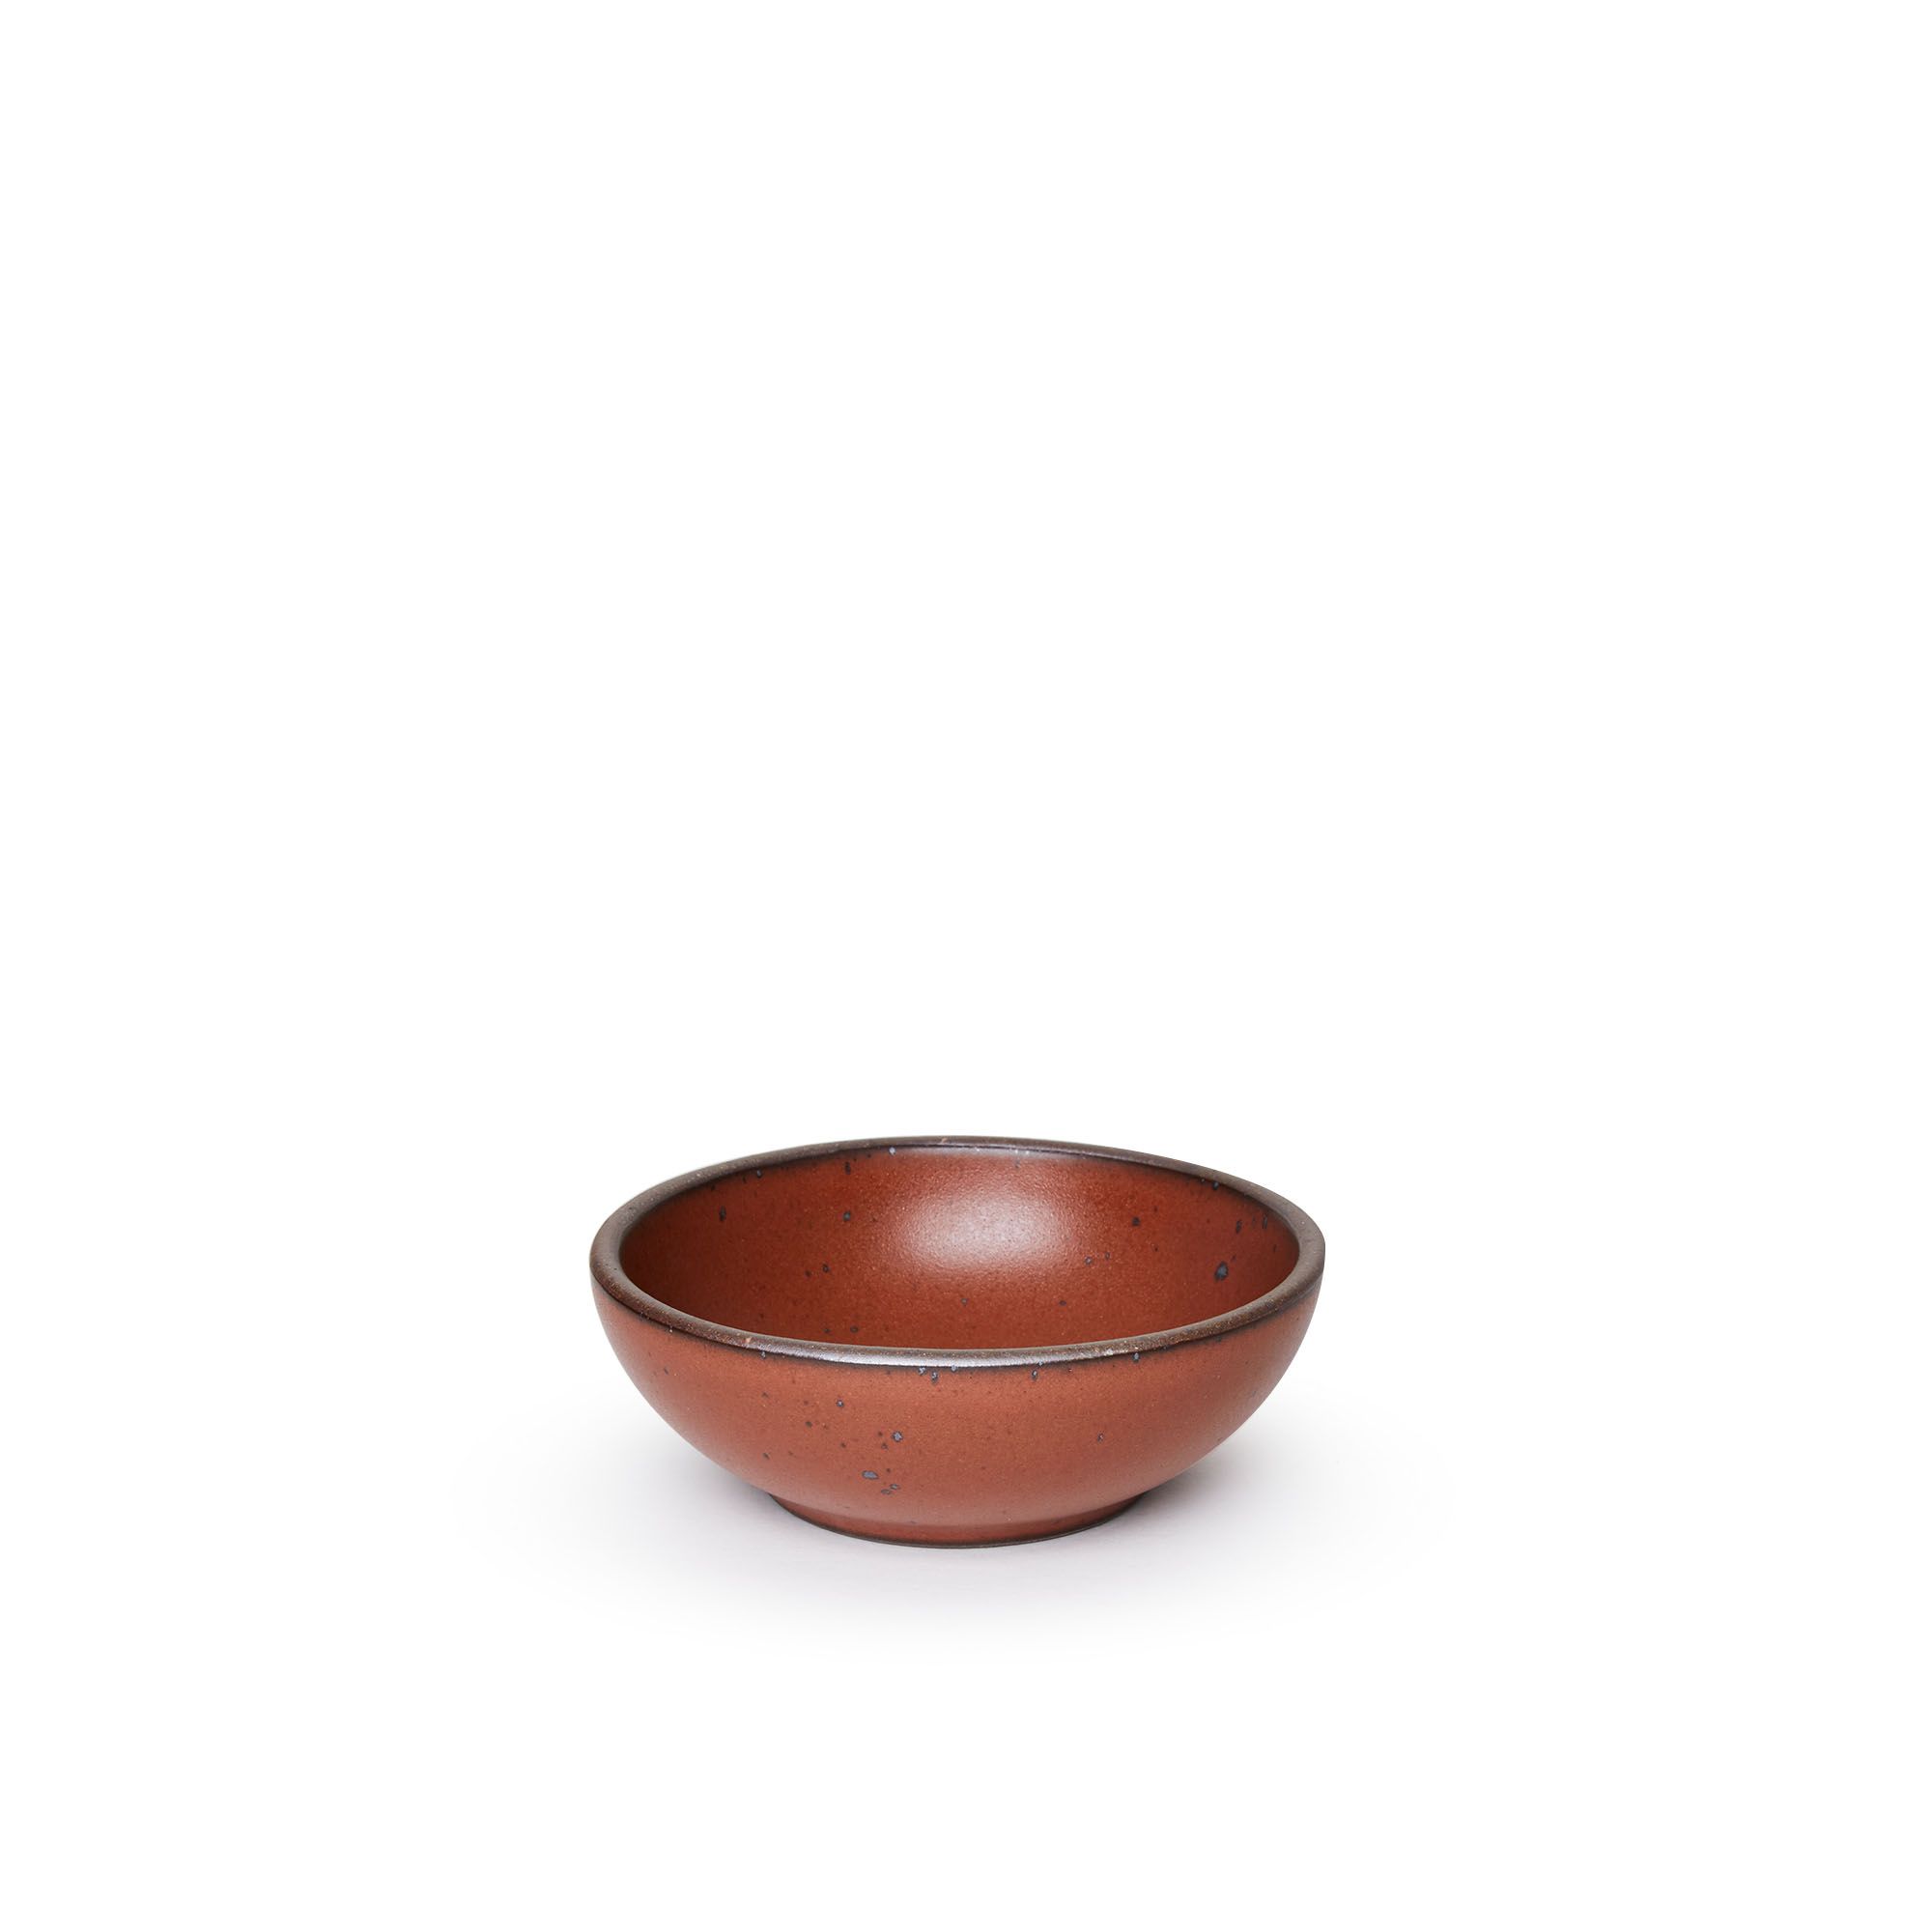 A small shallow ceramic bowl in a cool burnt terracotta color featuring iron speckles and an unglazed rim